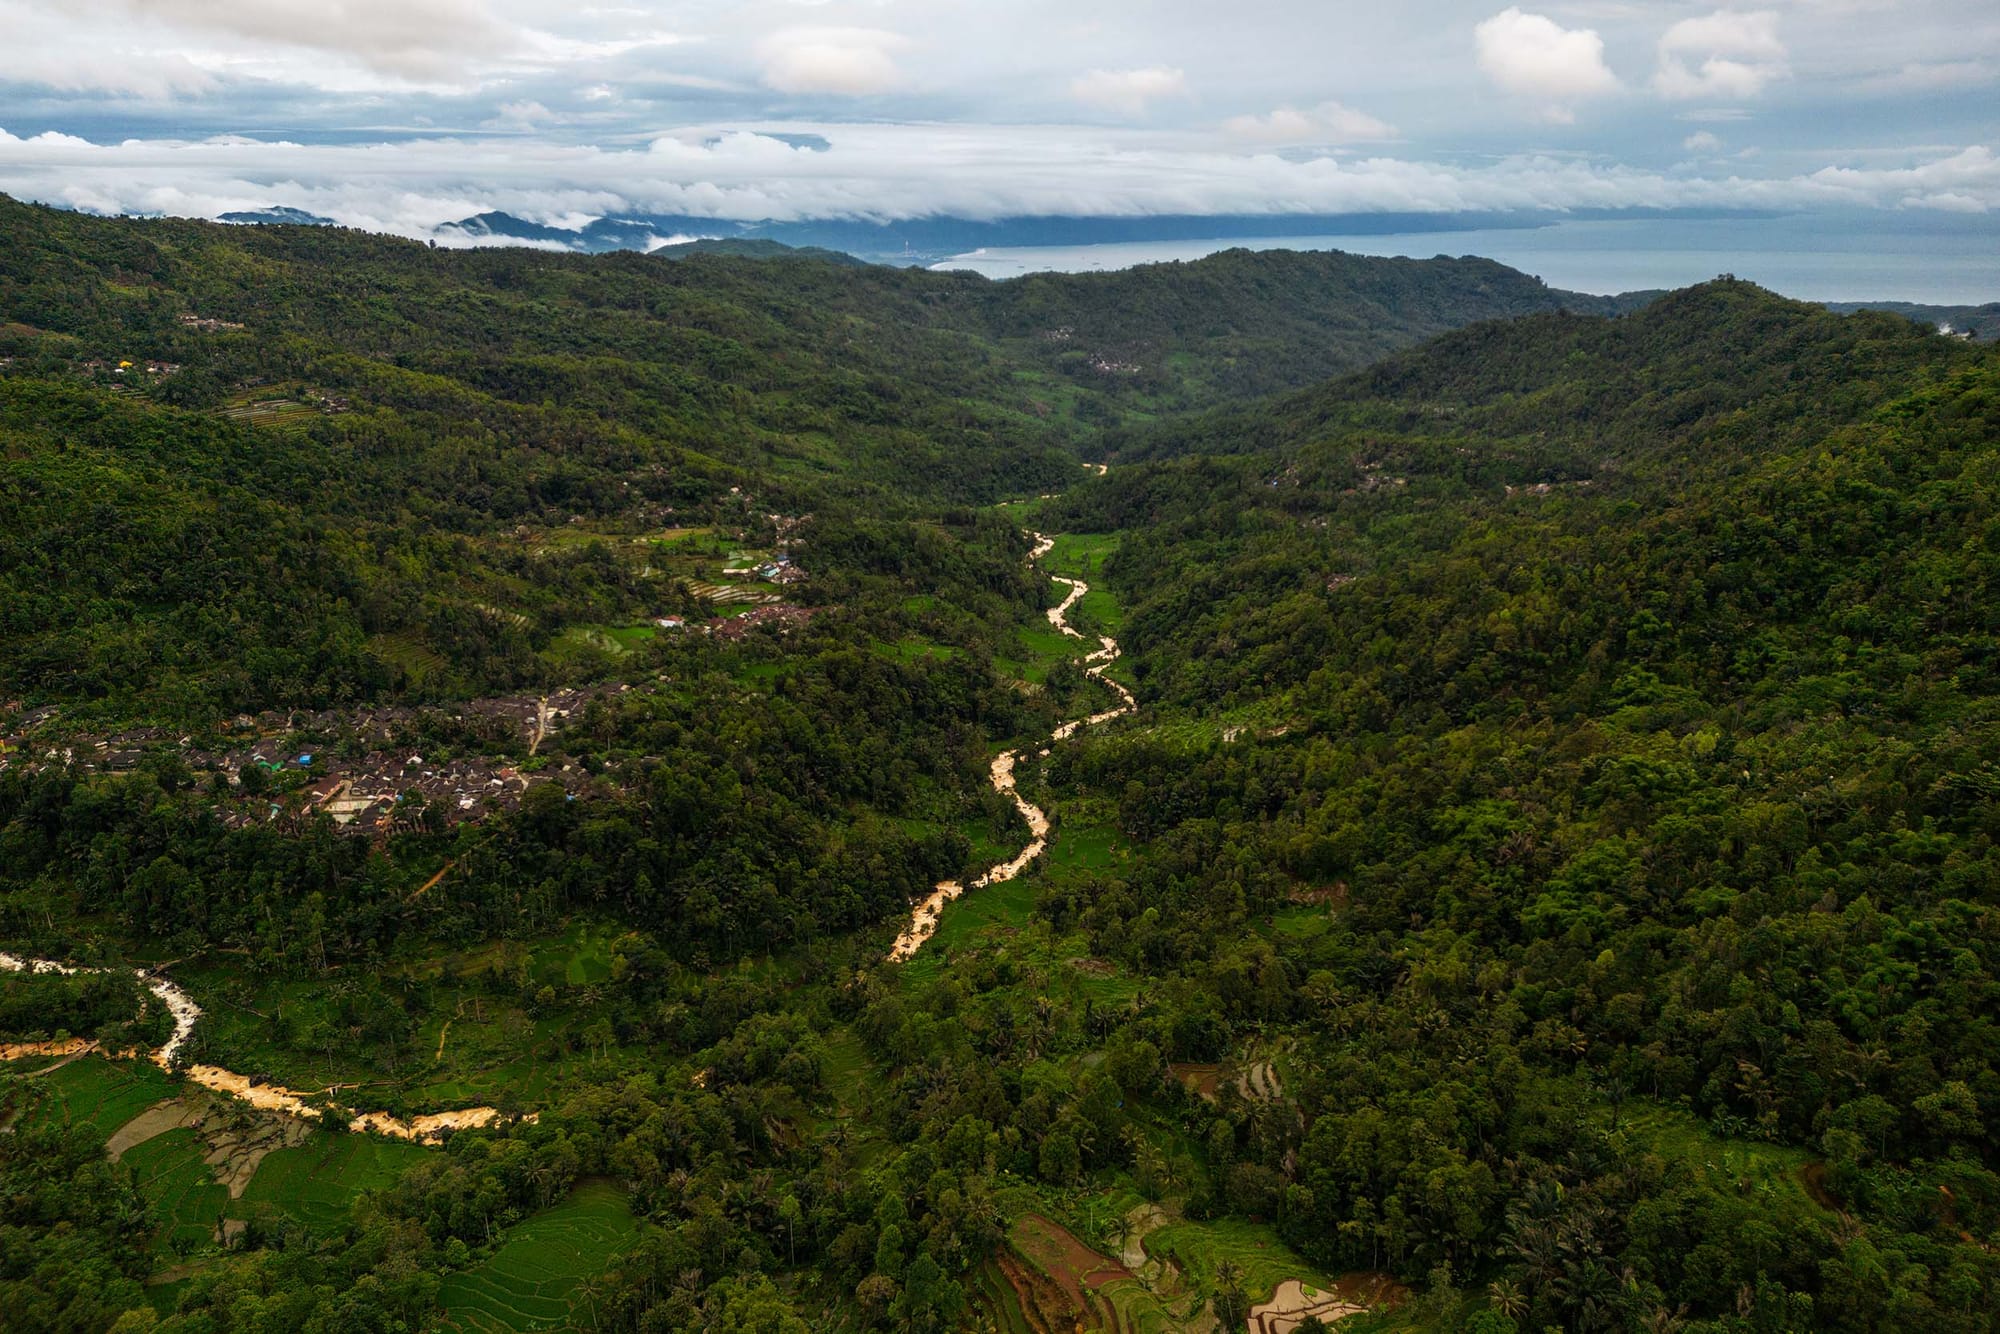 Aerial view of a road winding through a valley, with forested hills on either side and water visible beyond